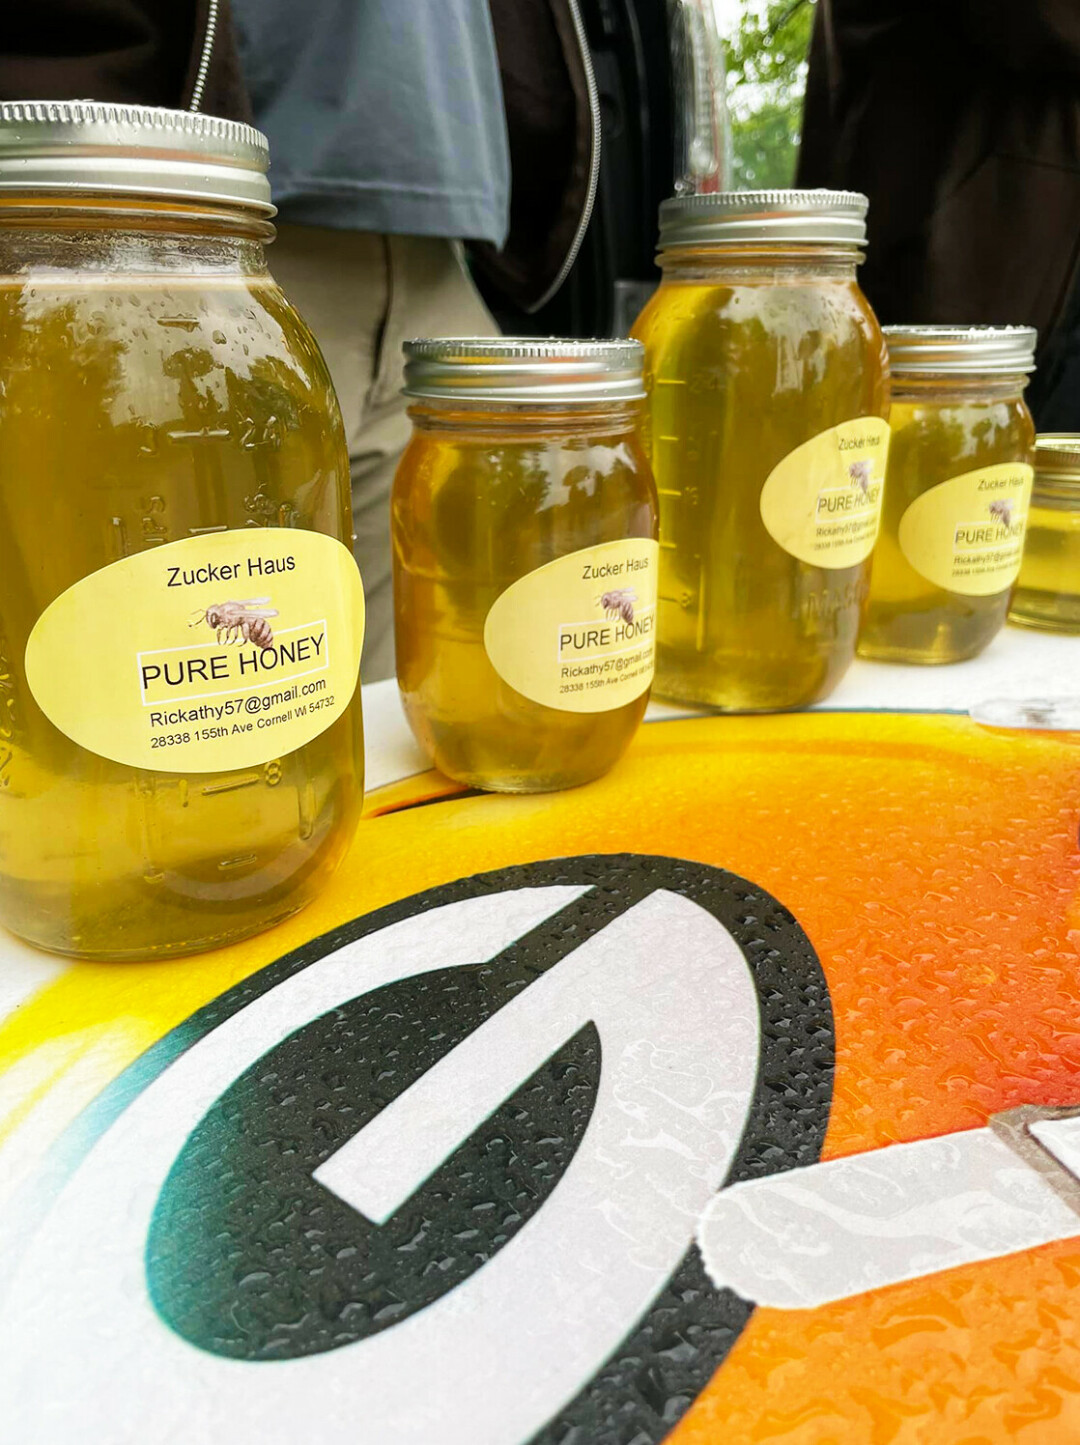 Zucker Haus' golden pure honey was offered at the market's first event. The Cadott Farmer's Market will continue to be held every Saturday through October this year. (Photo via Cadott Farmer's Market's social media)